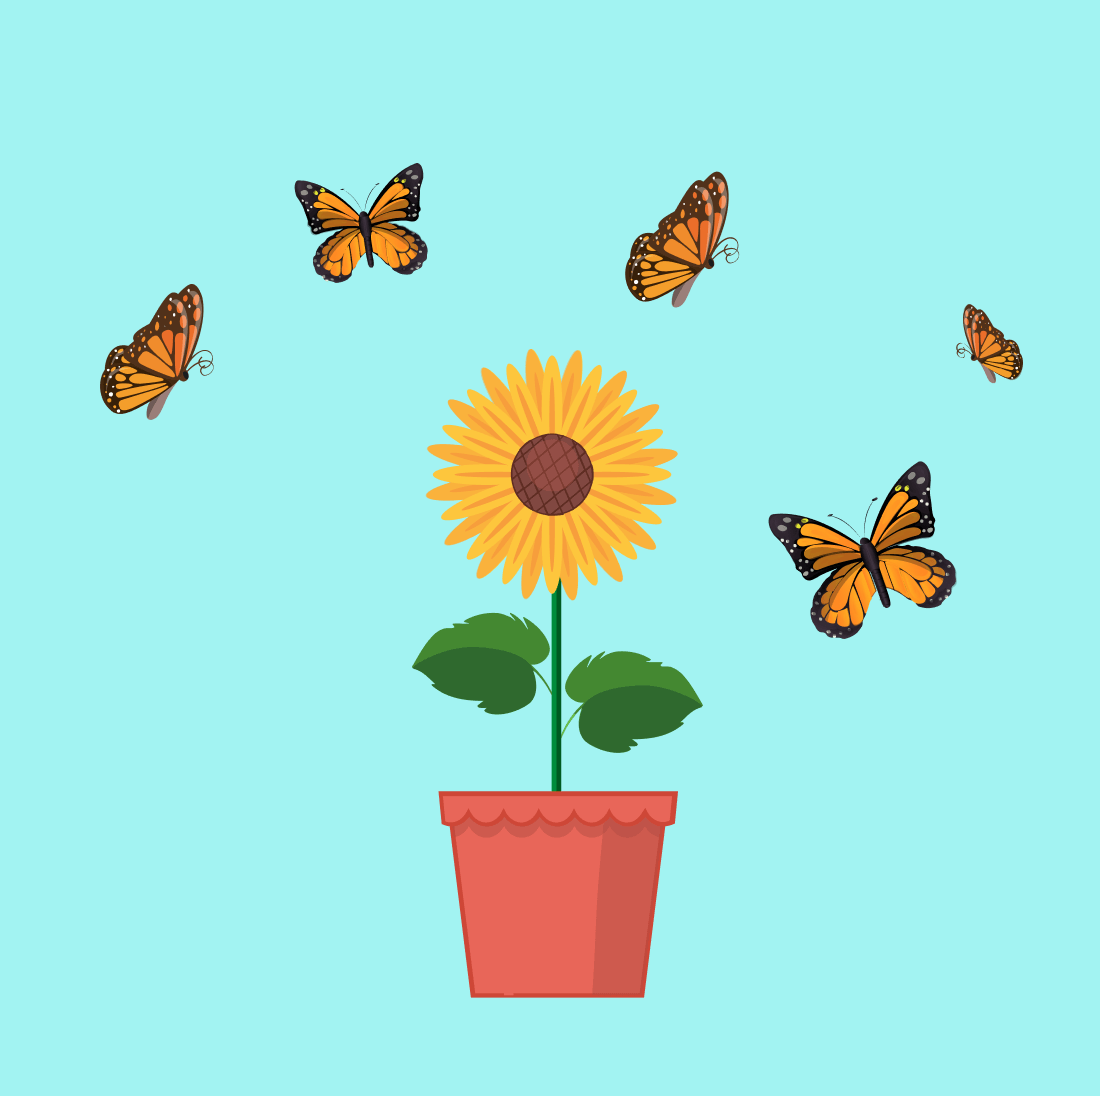 Sunflower in a flower pot surrounded by butterflies.